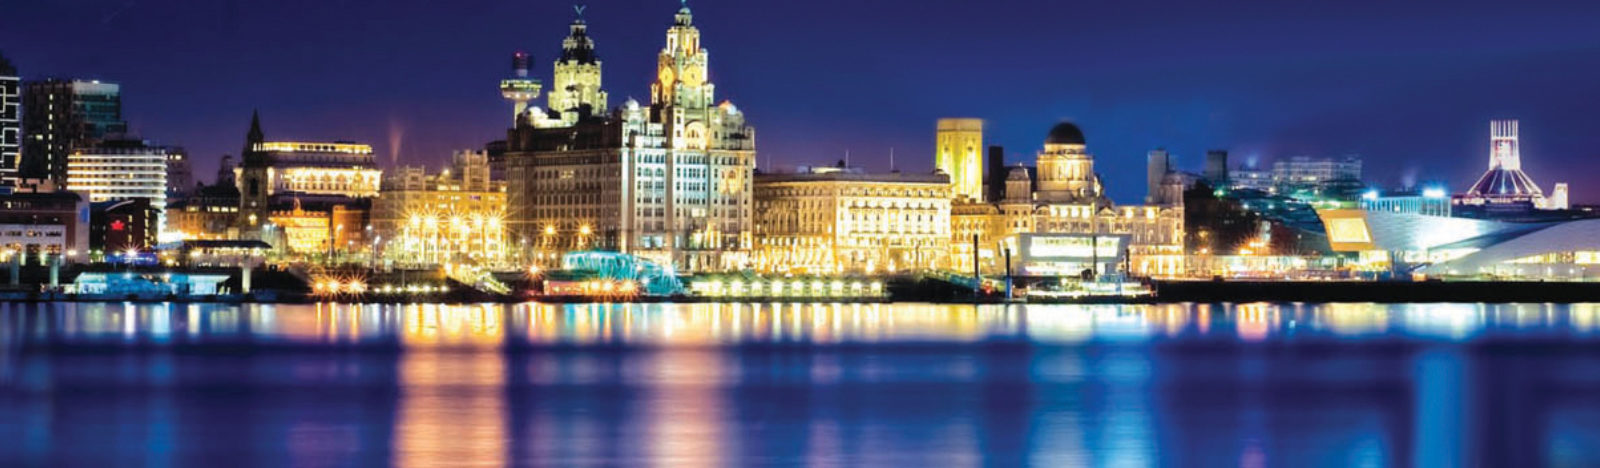 Liverpool waterfront2